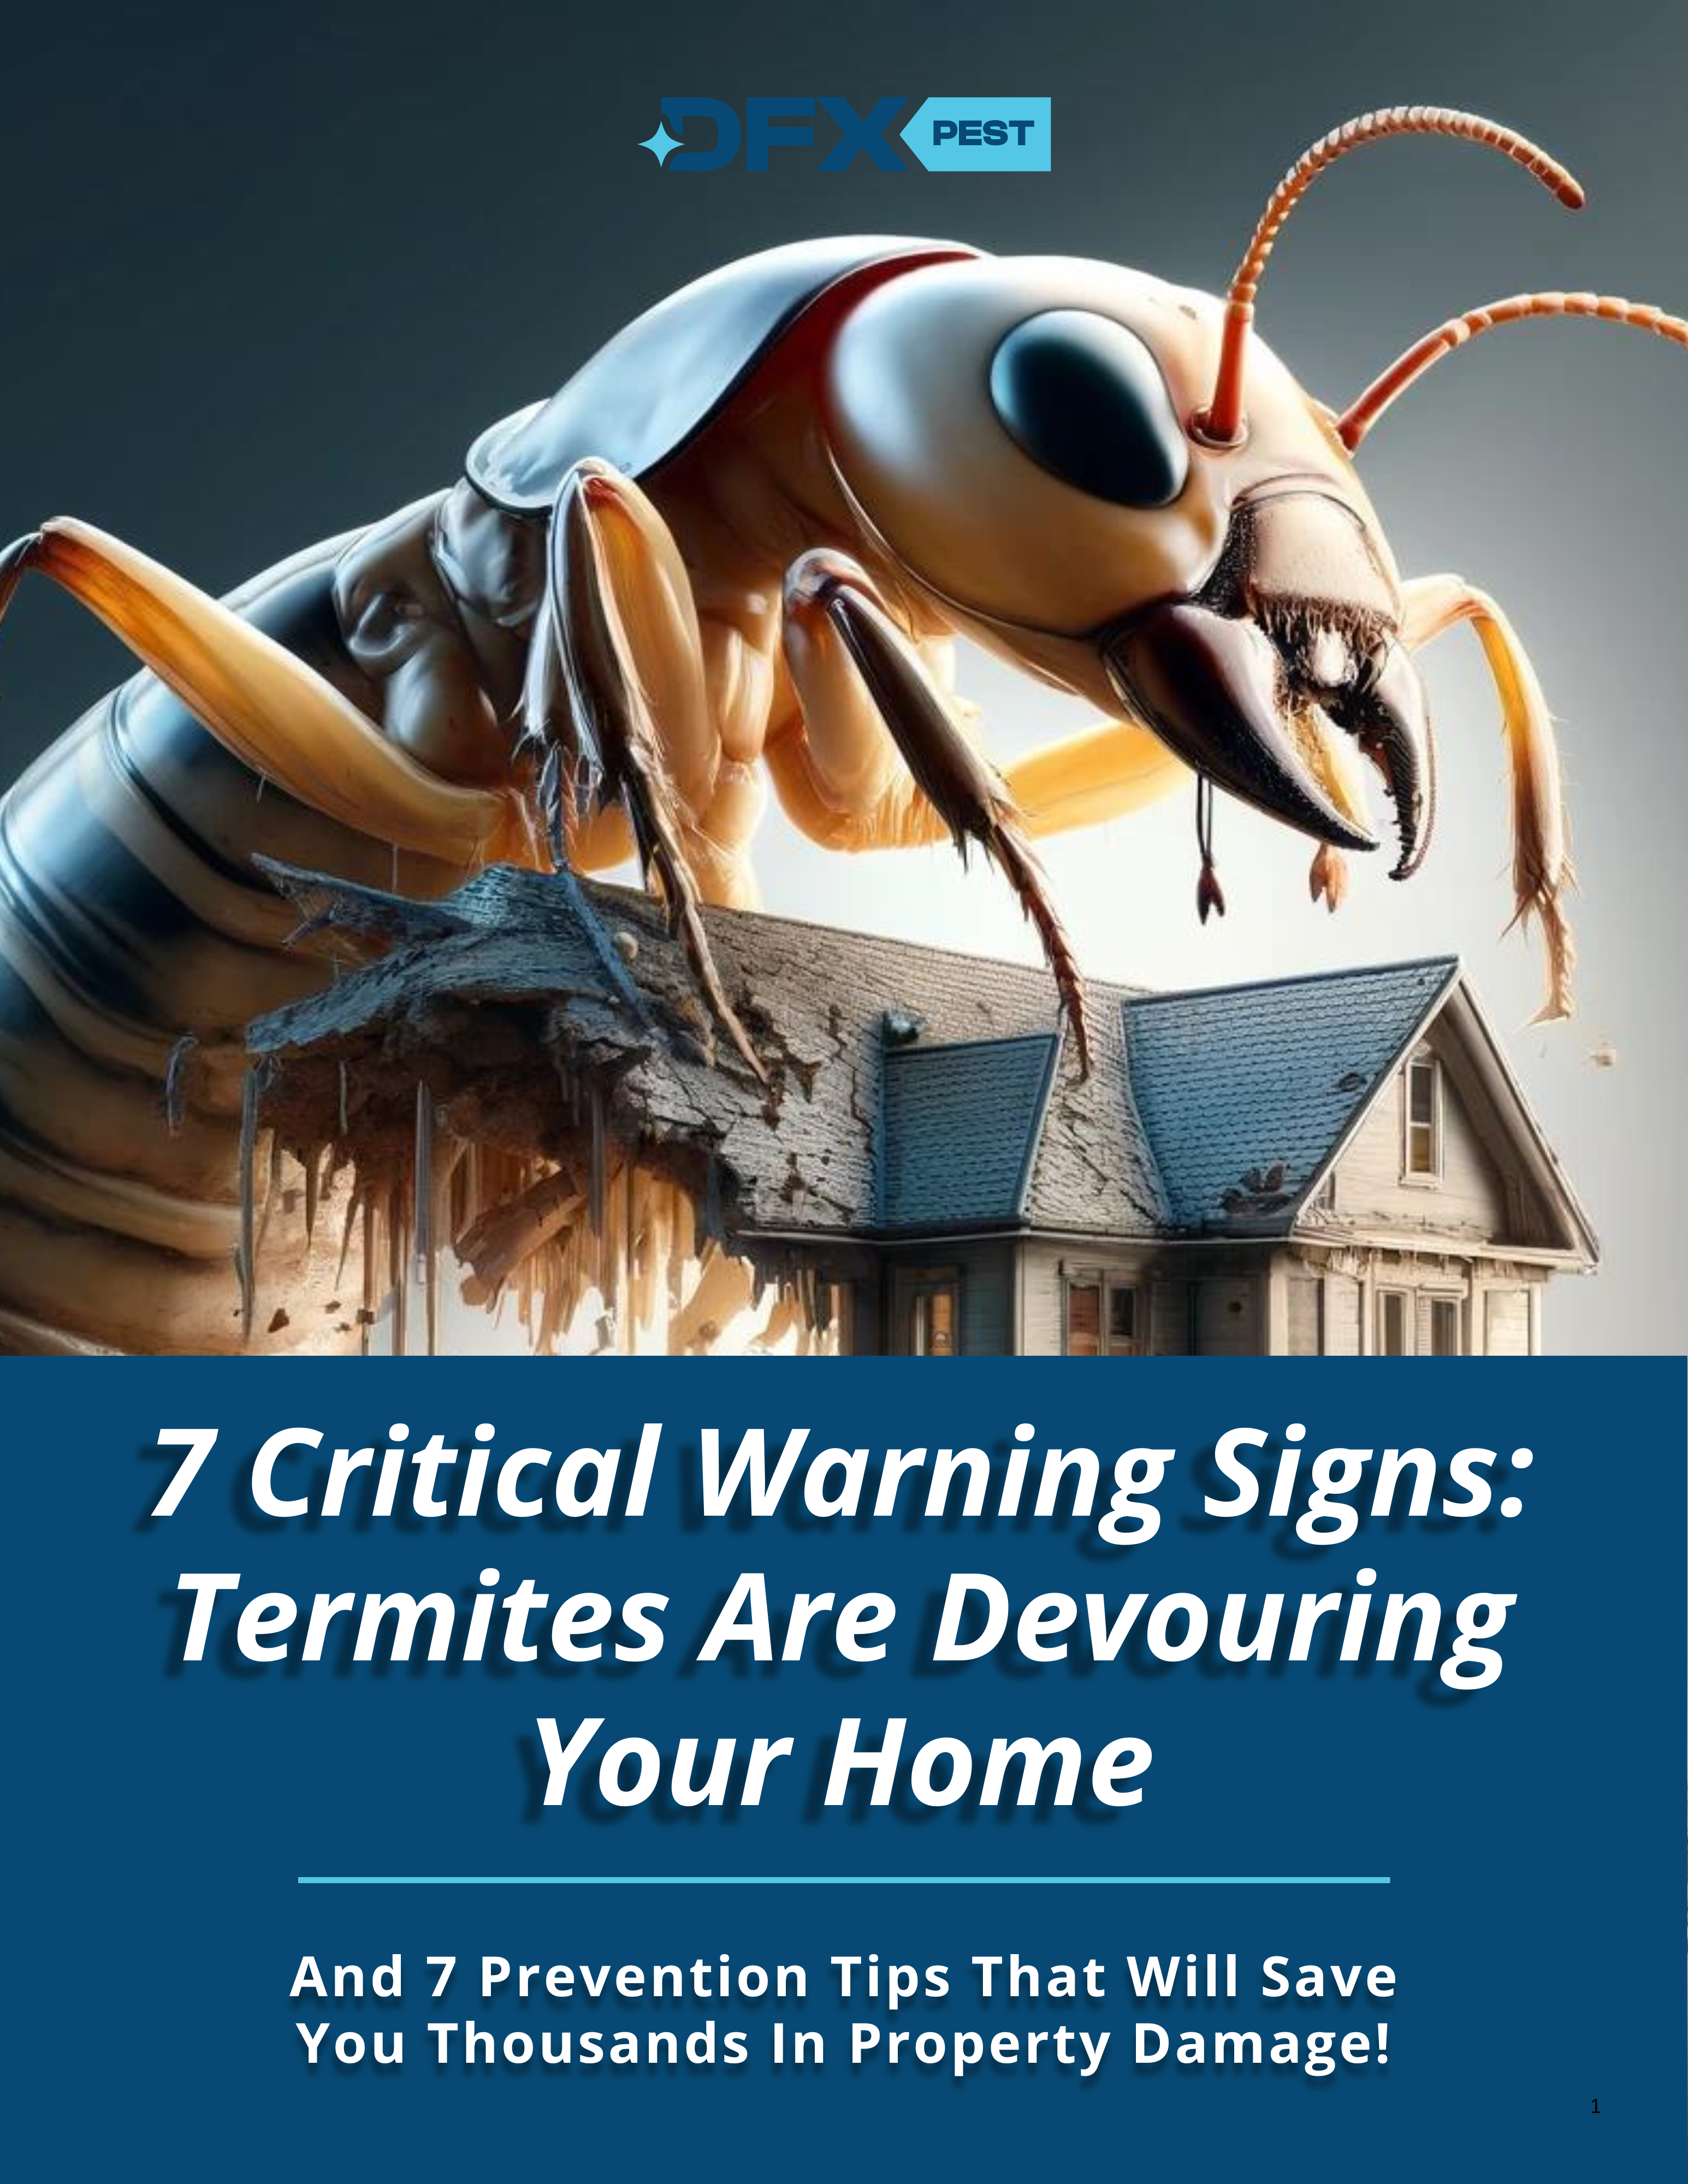 7 critical warning signs termites are damaging your home